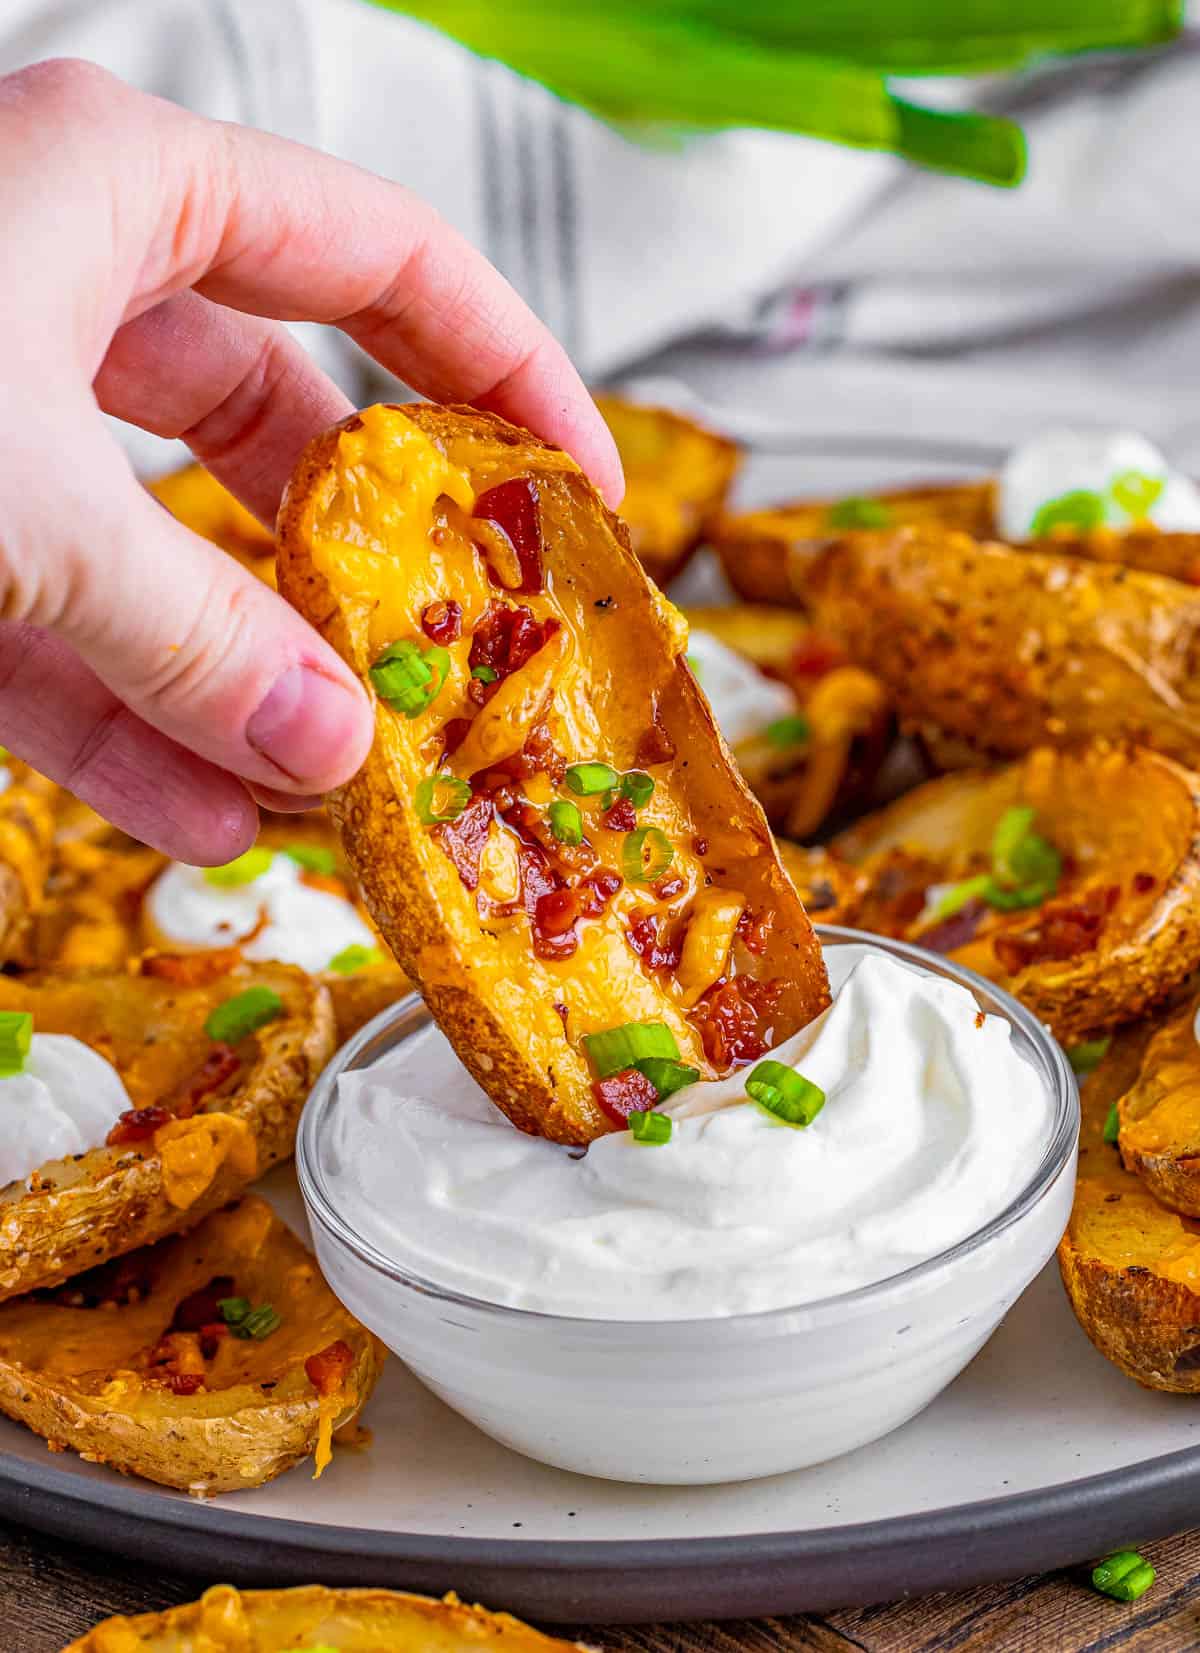 Hand dipping one of the Loaded Potato Skins in sour cream.